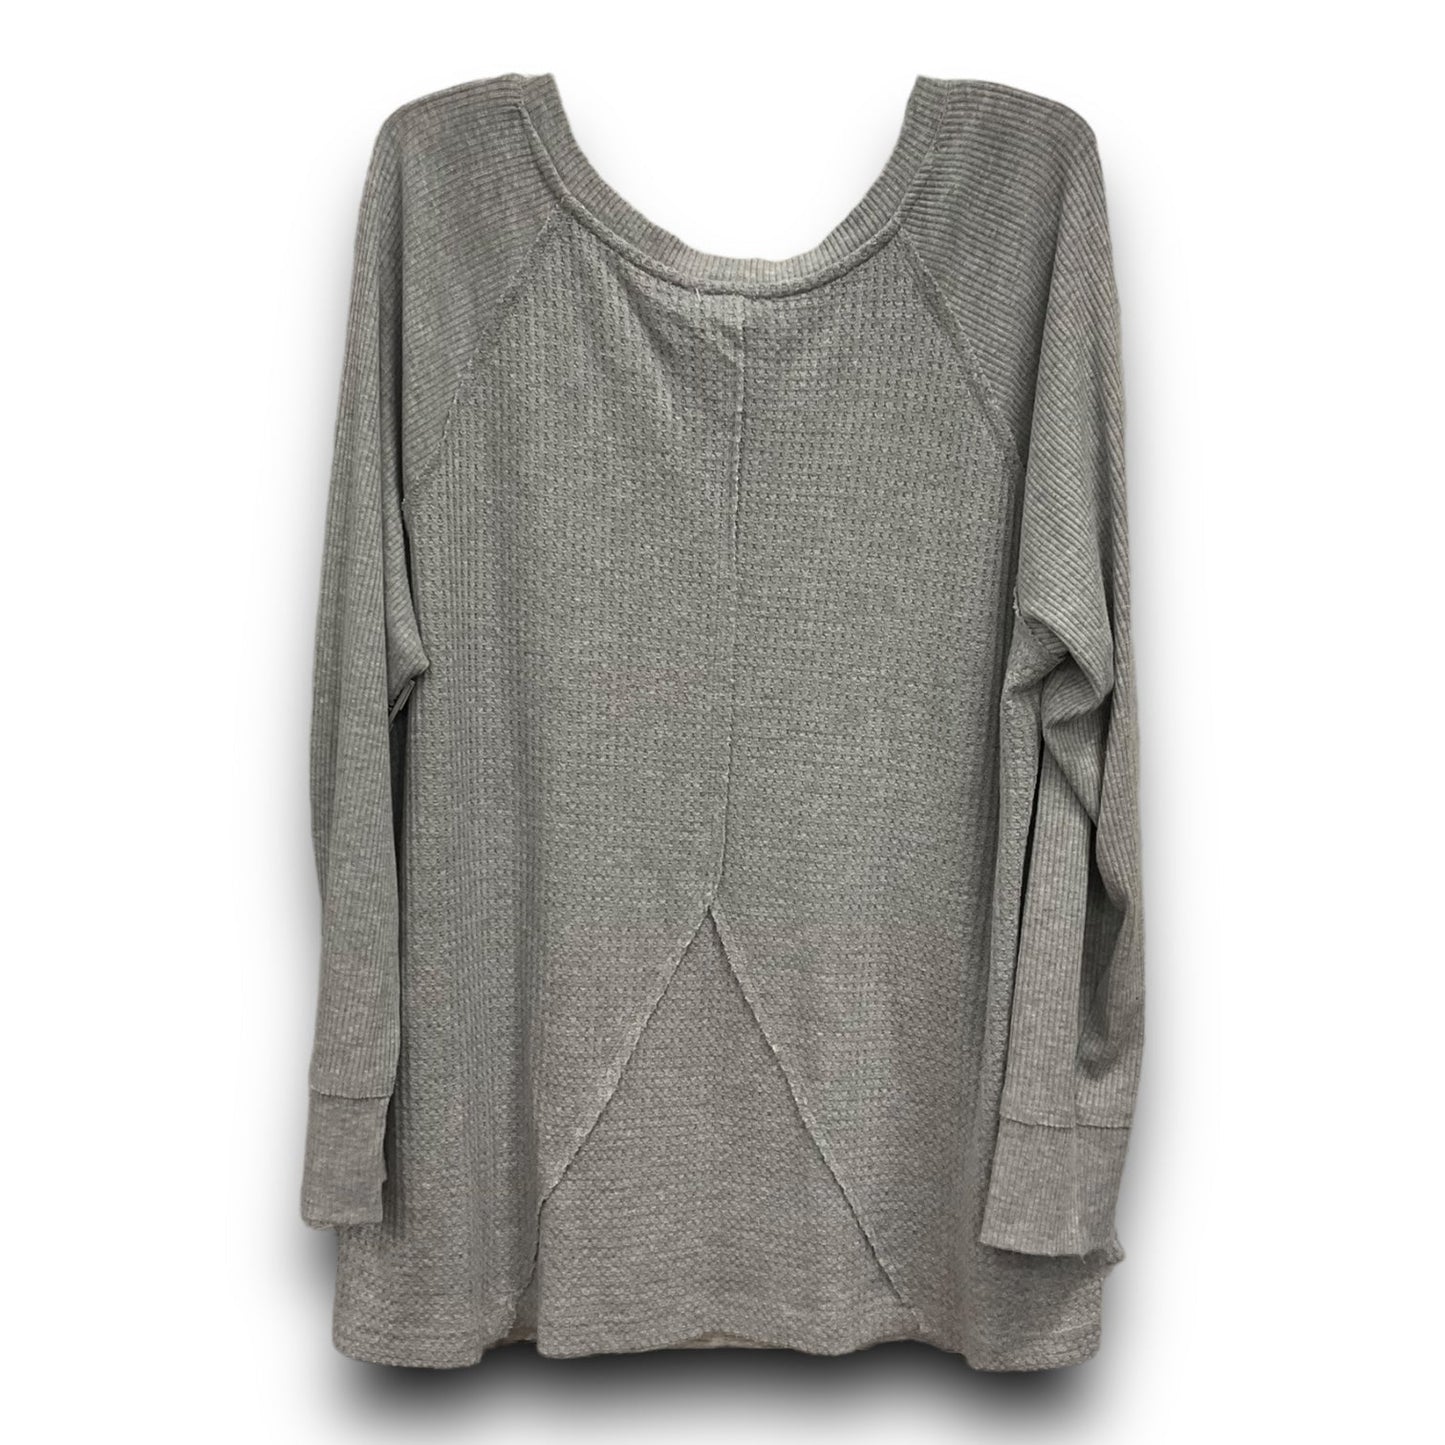 Grey Top Long Sleeve Basic Chelsea And Theodore, Size Xxl